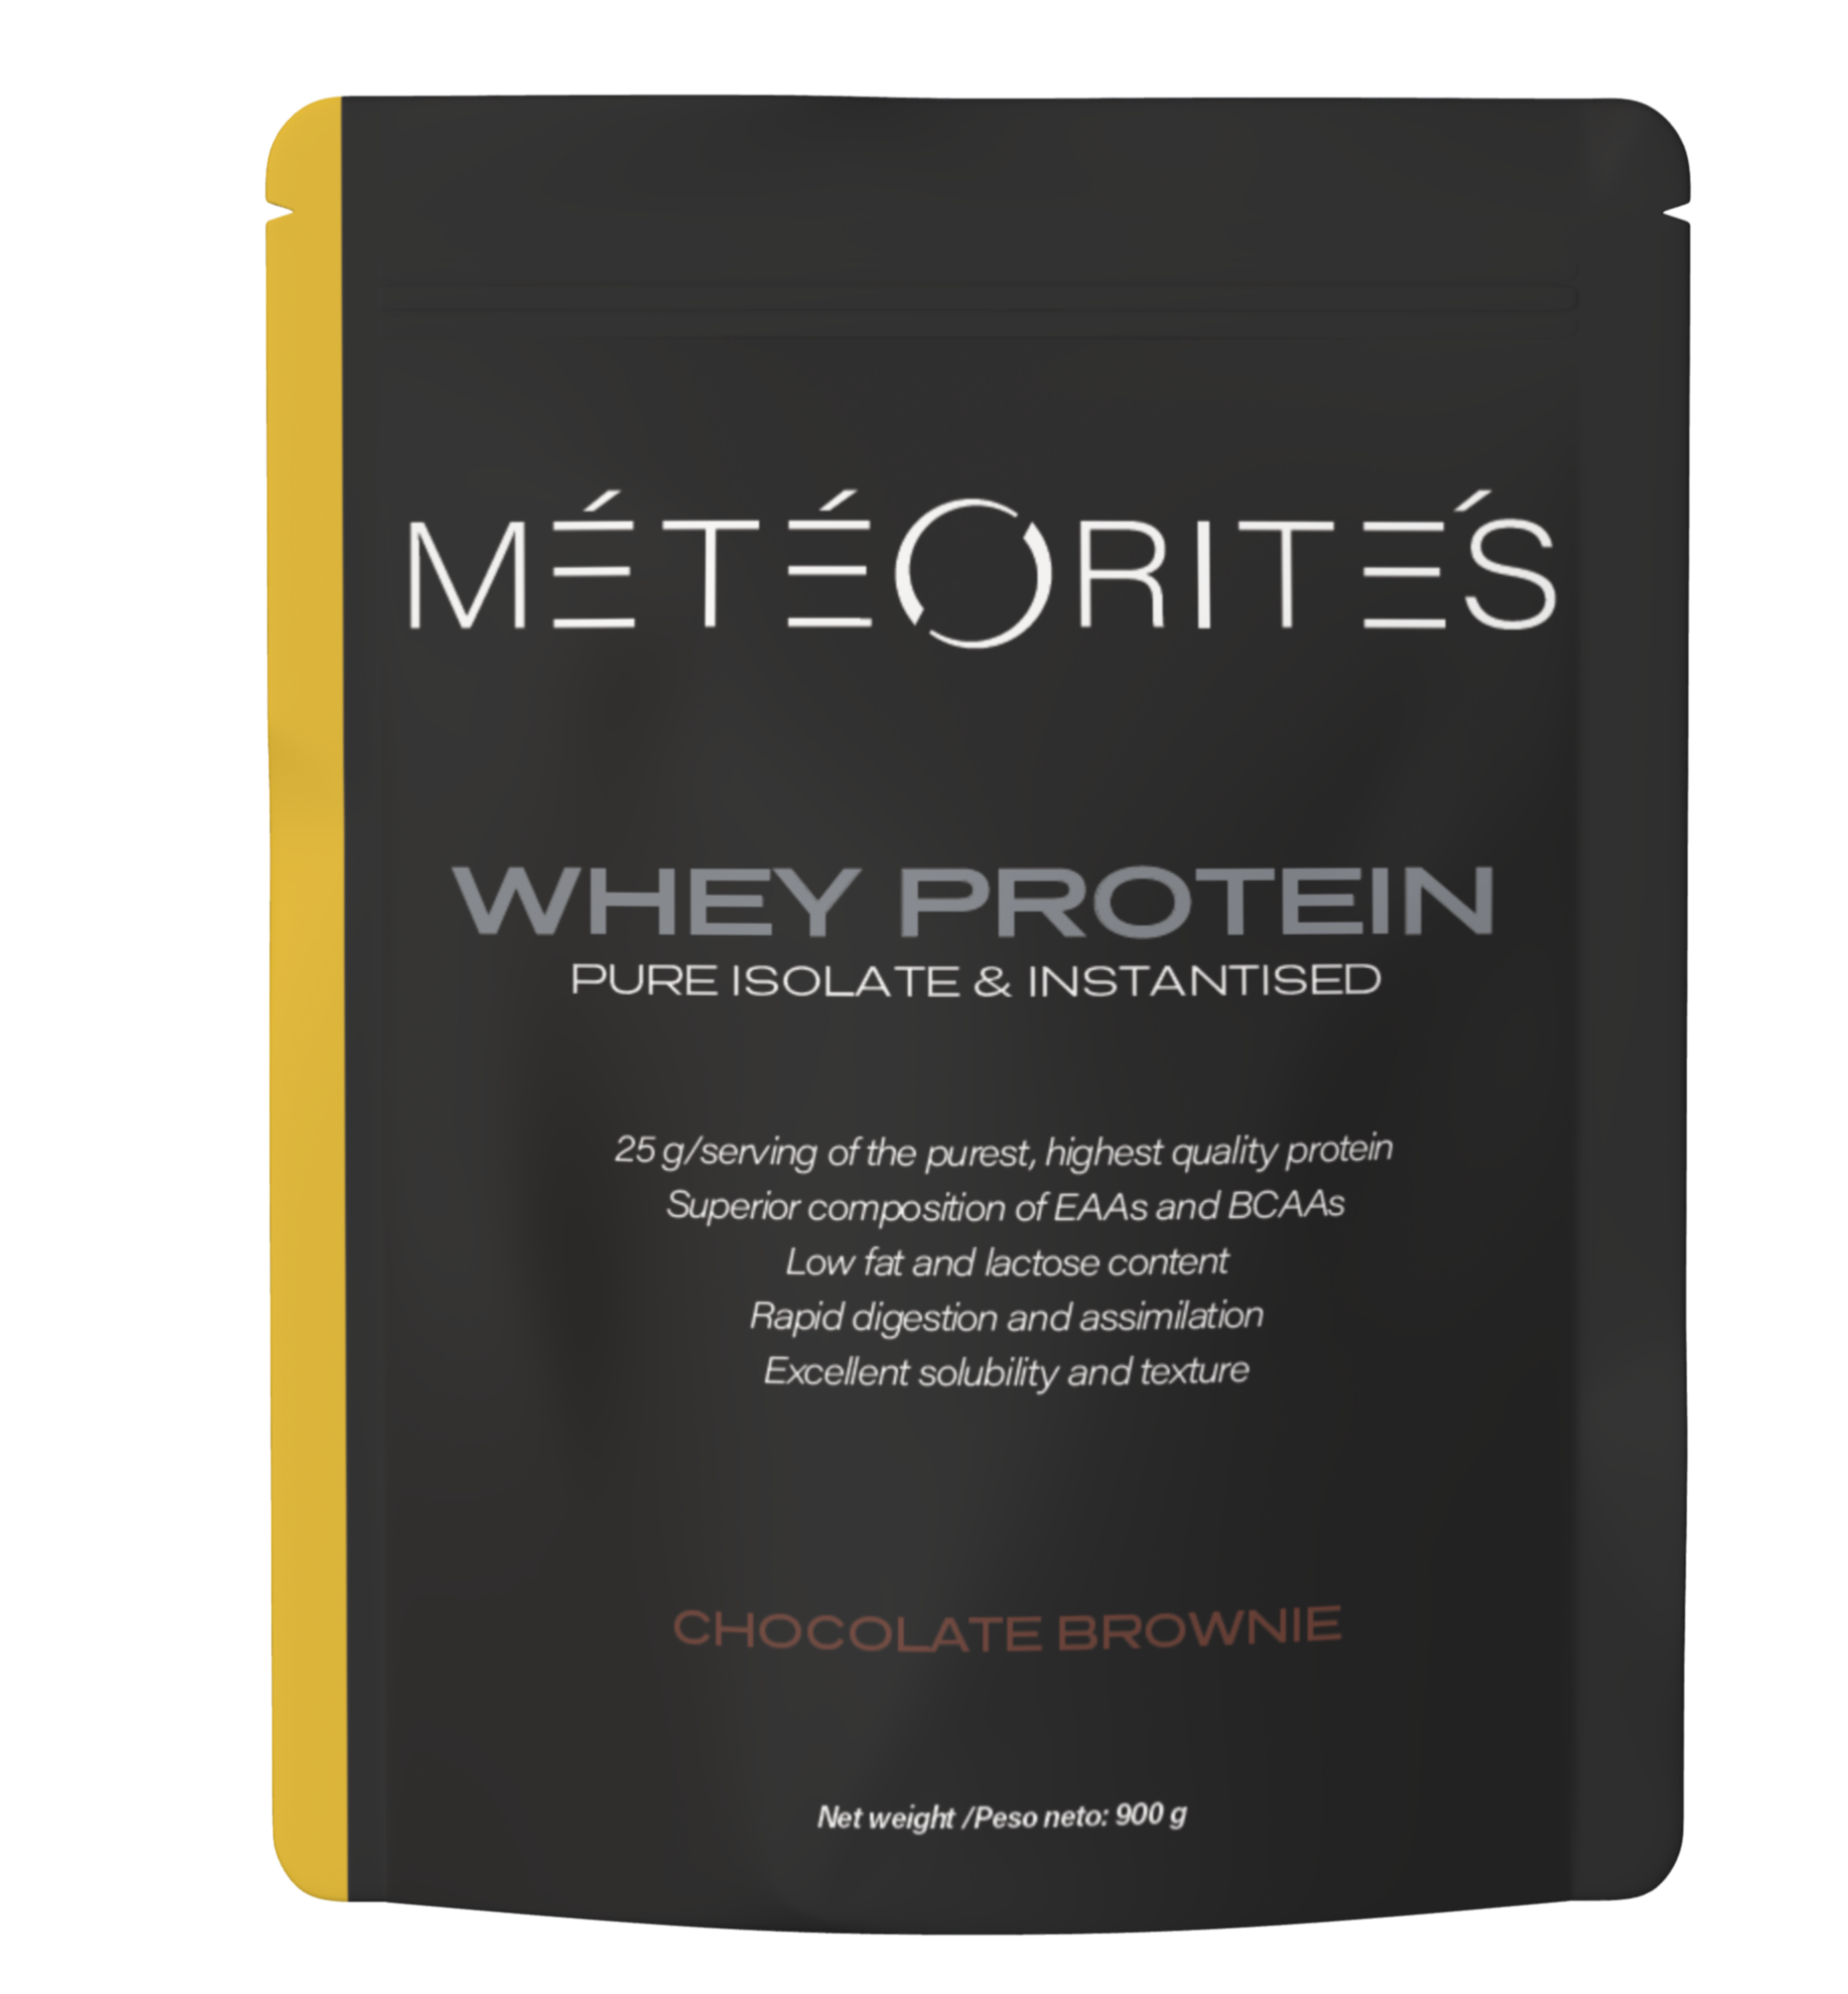 WHEY PROTEIN Pure Isolated & Instantised